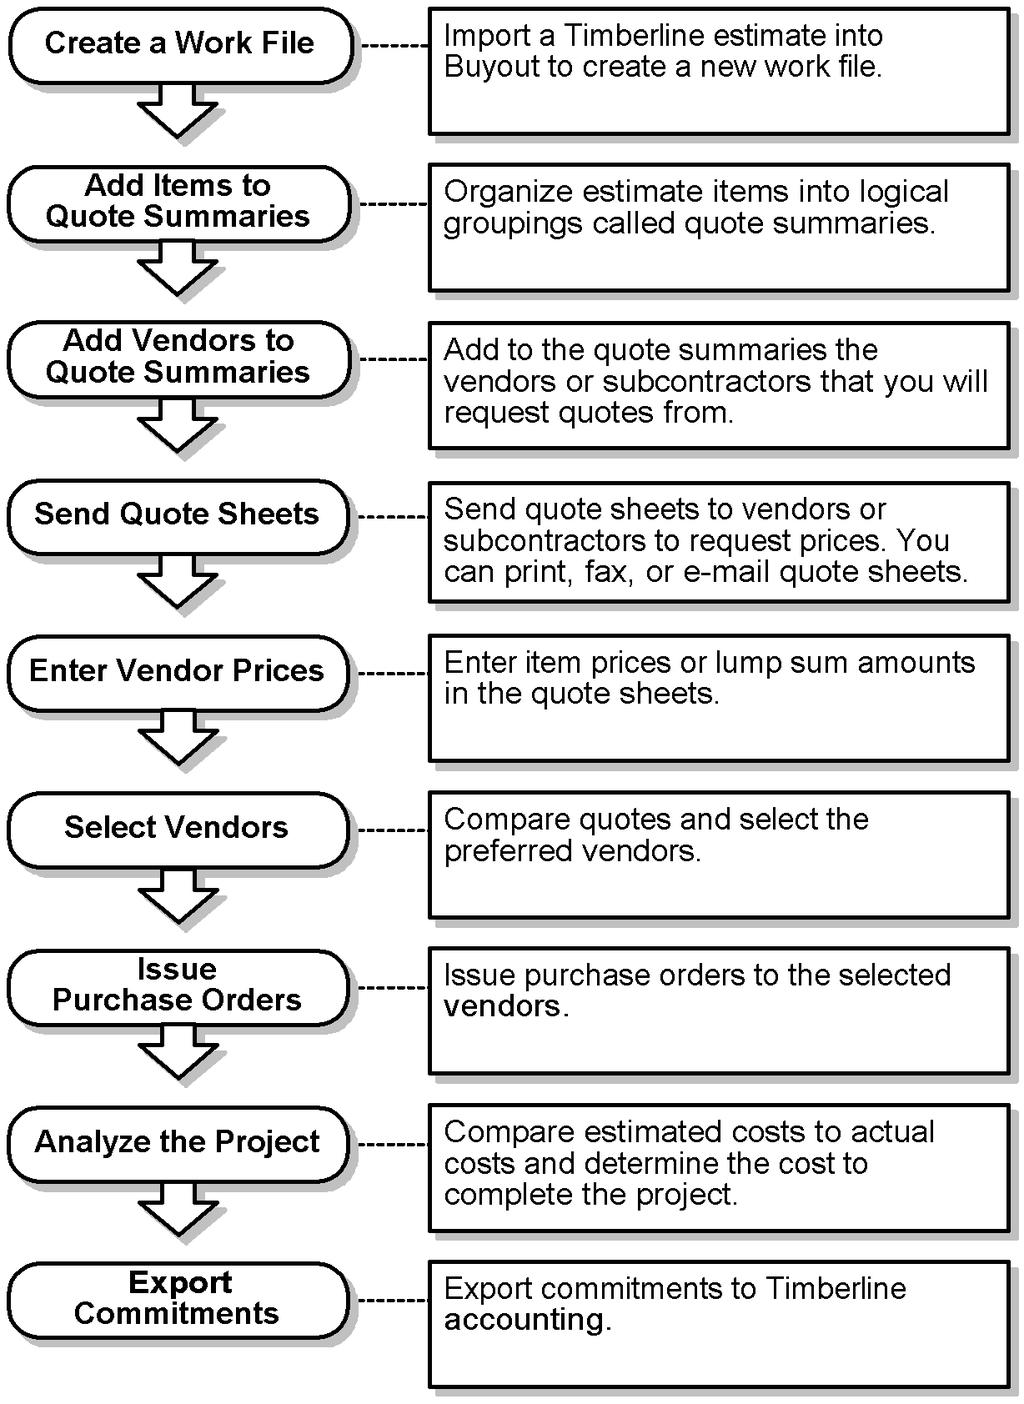 Getting Started With Buyout 10 Section 2 The Buyout Workflow Although each estimator, project manager, purchasing